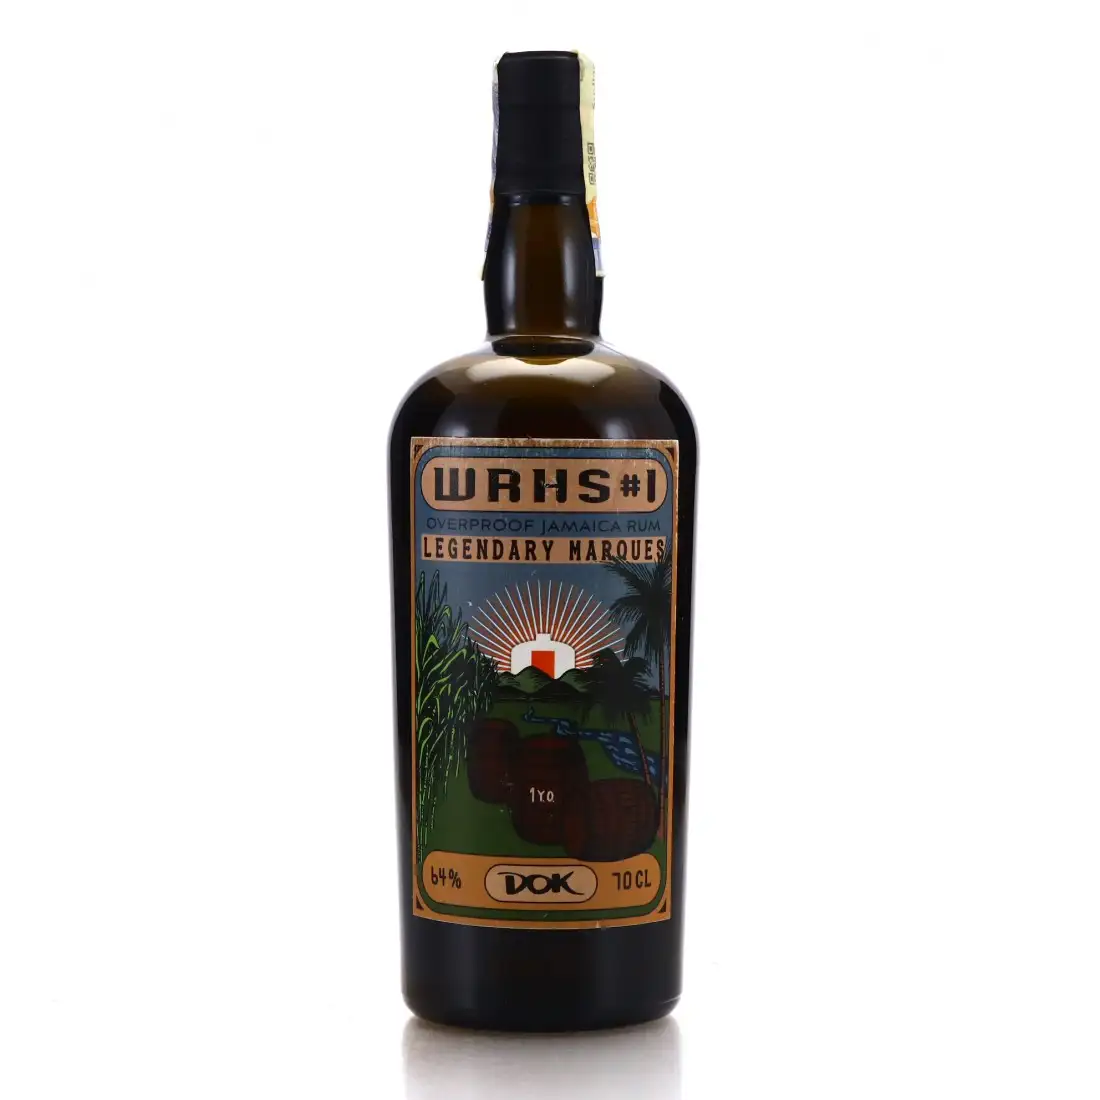 Image of the front of the bottle of the rum Overproof Jamaica Rum Legendary Marques DOK